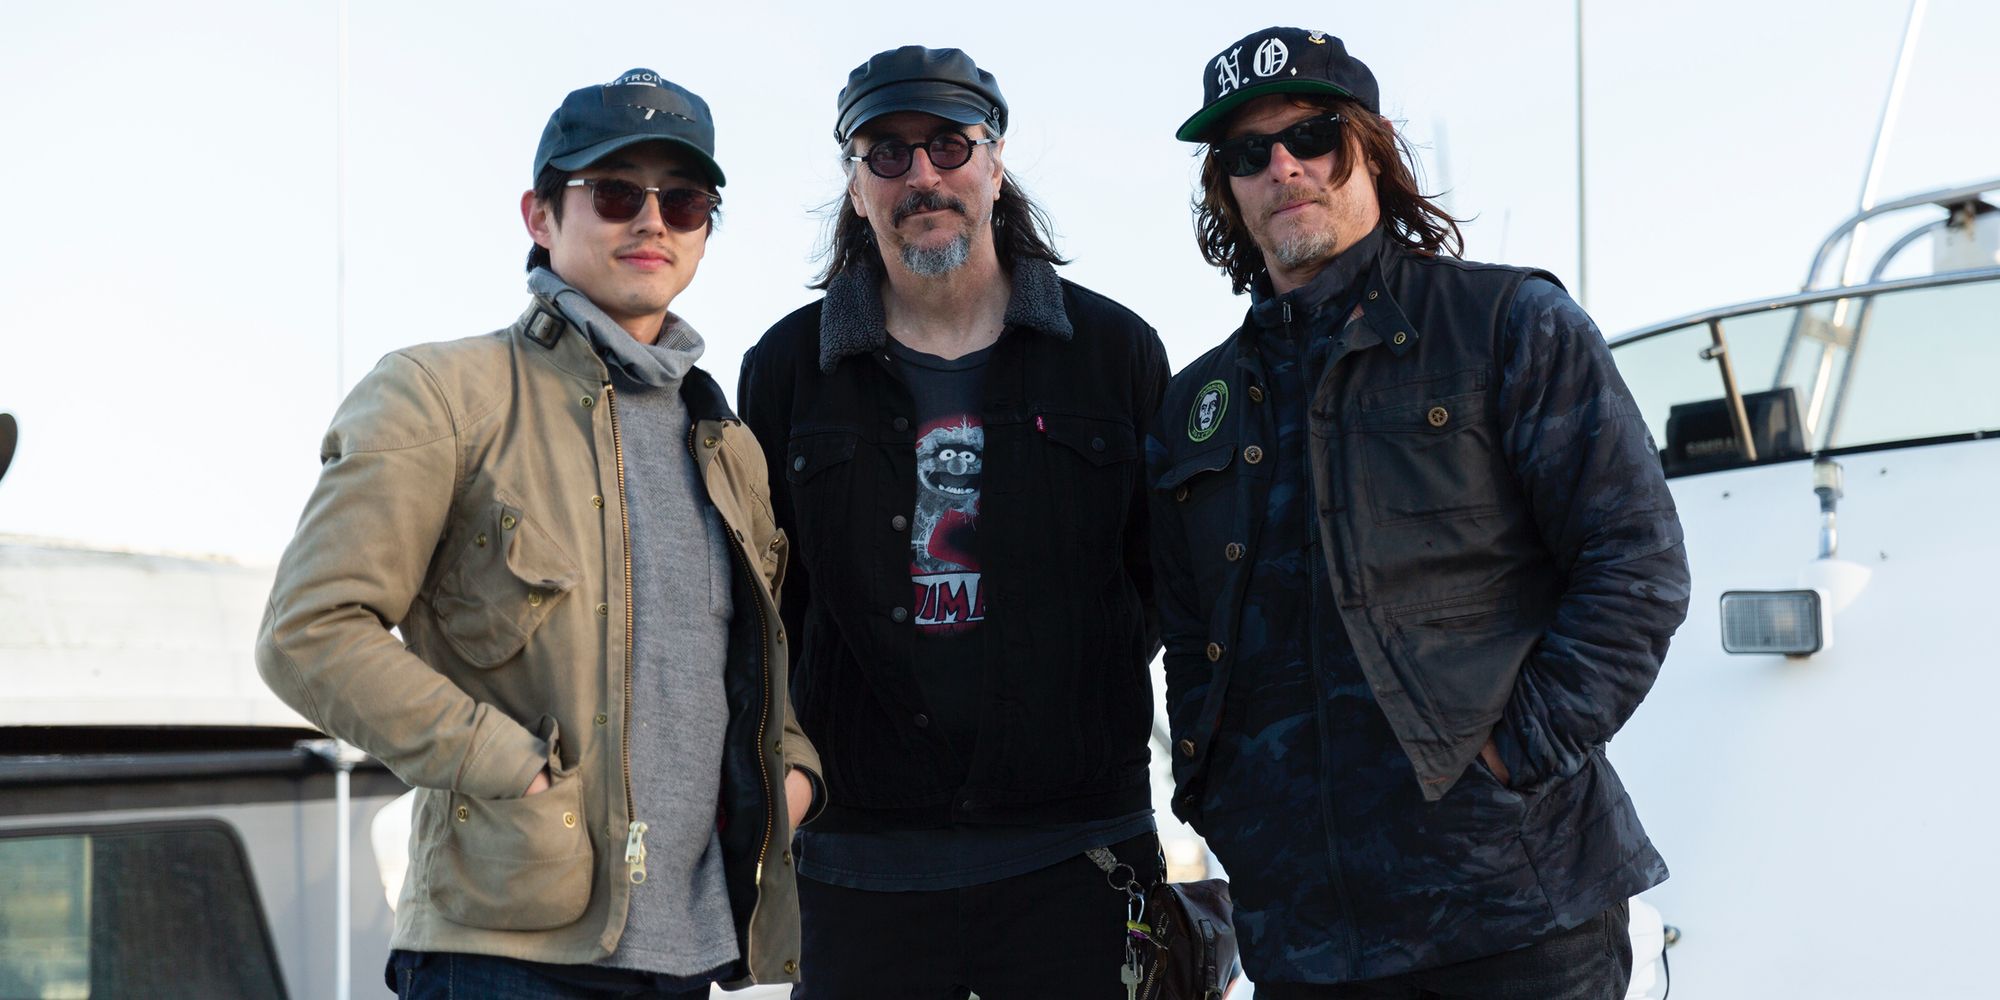 Steven Yeun Les Claypool and Norman Reedus In Ride With Norman Reedus Season 3 AMC